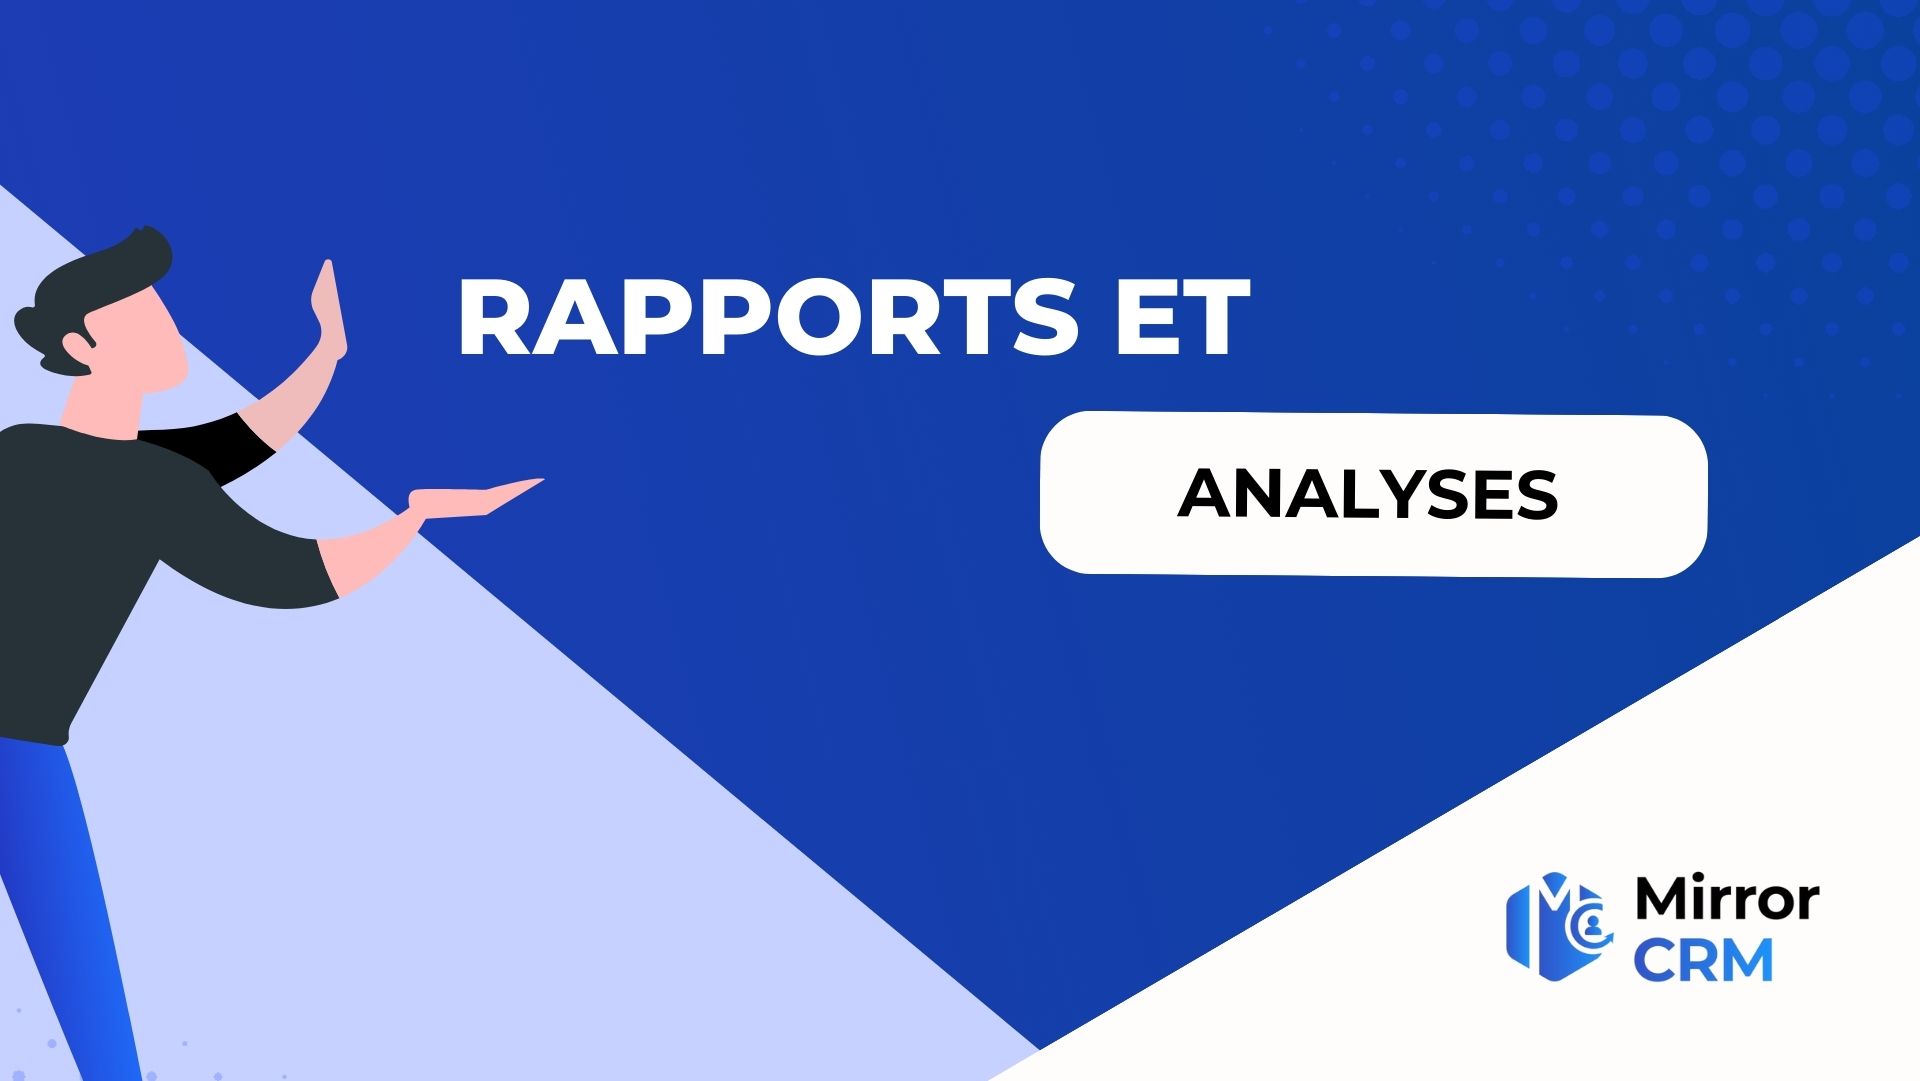 MirrorCRM : Rapports et analyses